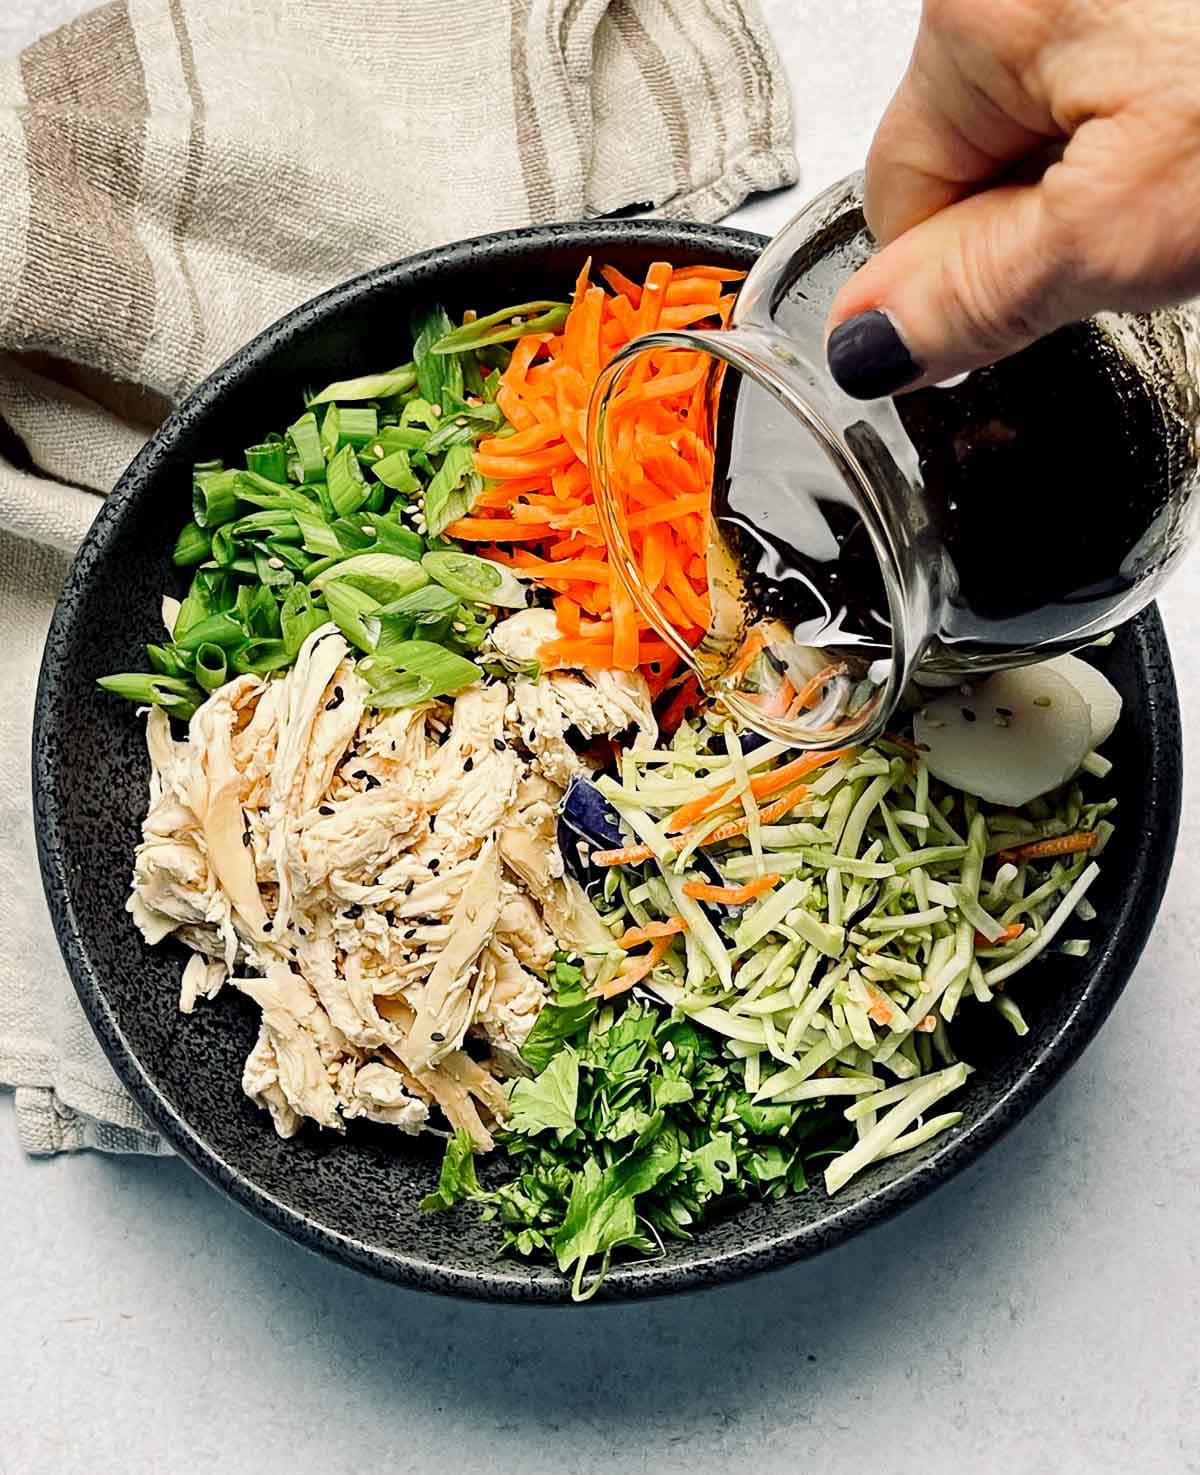 A hand pouring dressing into a large black bowl filled with Chinese chicken salad featuring shredded chicken, shredded carrots, broccoli slaw, scallions, water chestnuts and chow mein noodles, with a linen napkin on the side.